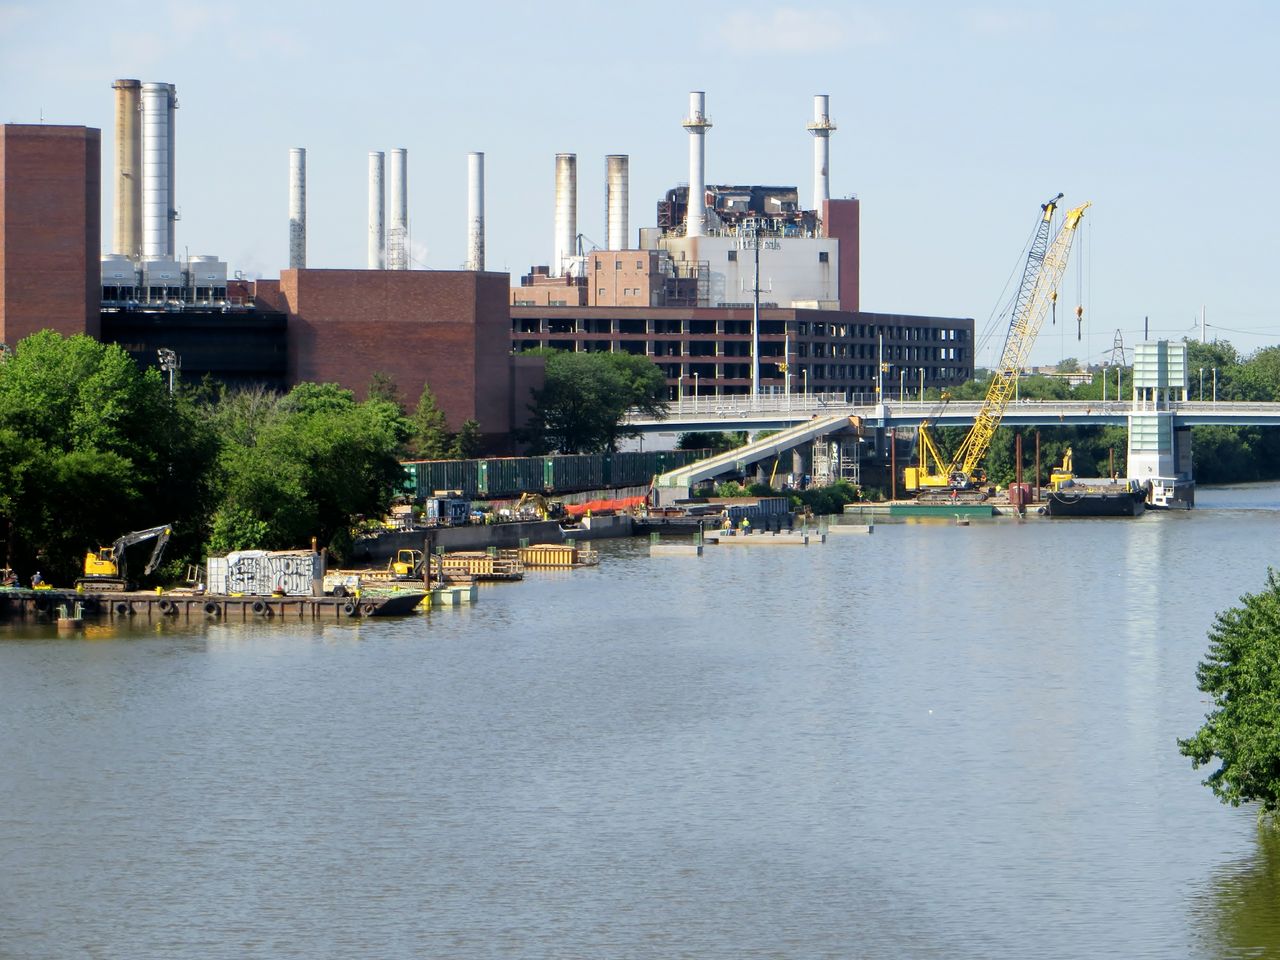 Phases of construction and equipment span the Schuylkill's banks